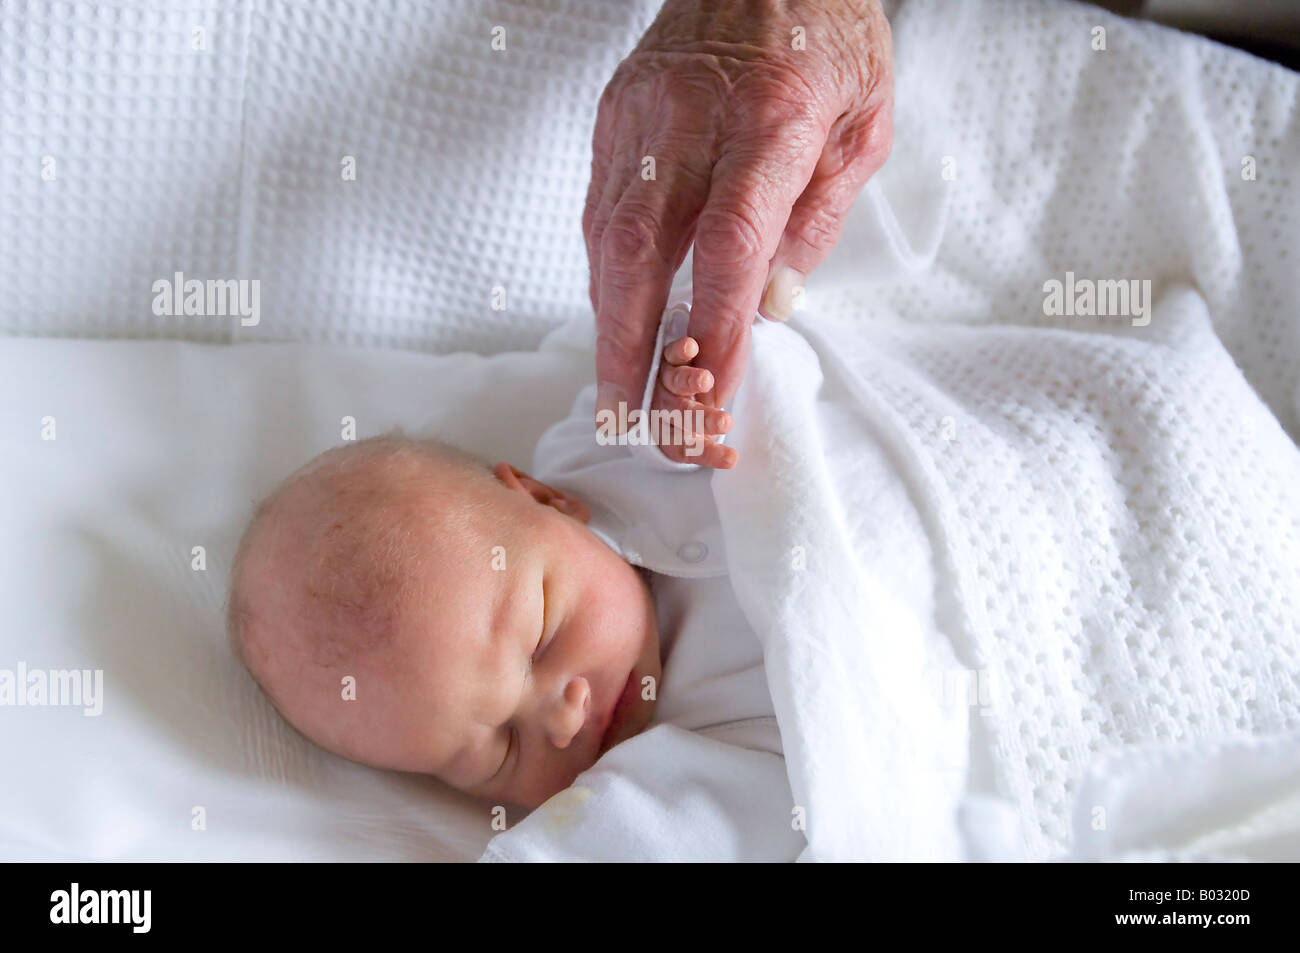 New Born With Old Hand Stock Photo